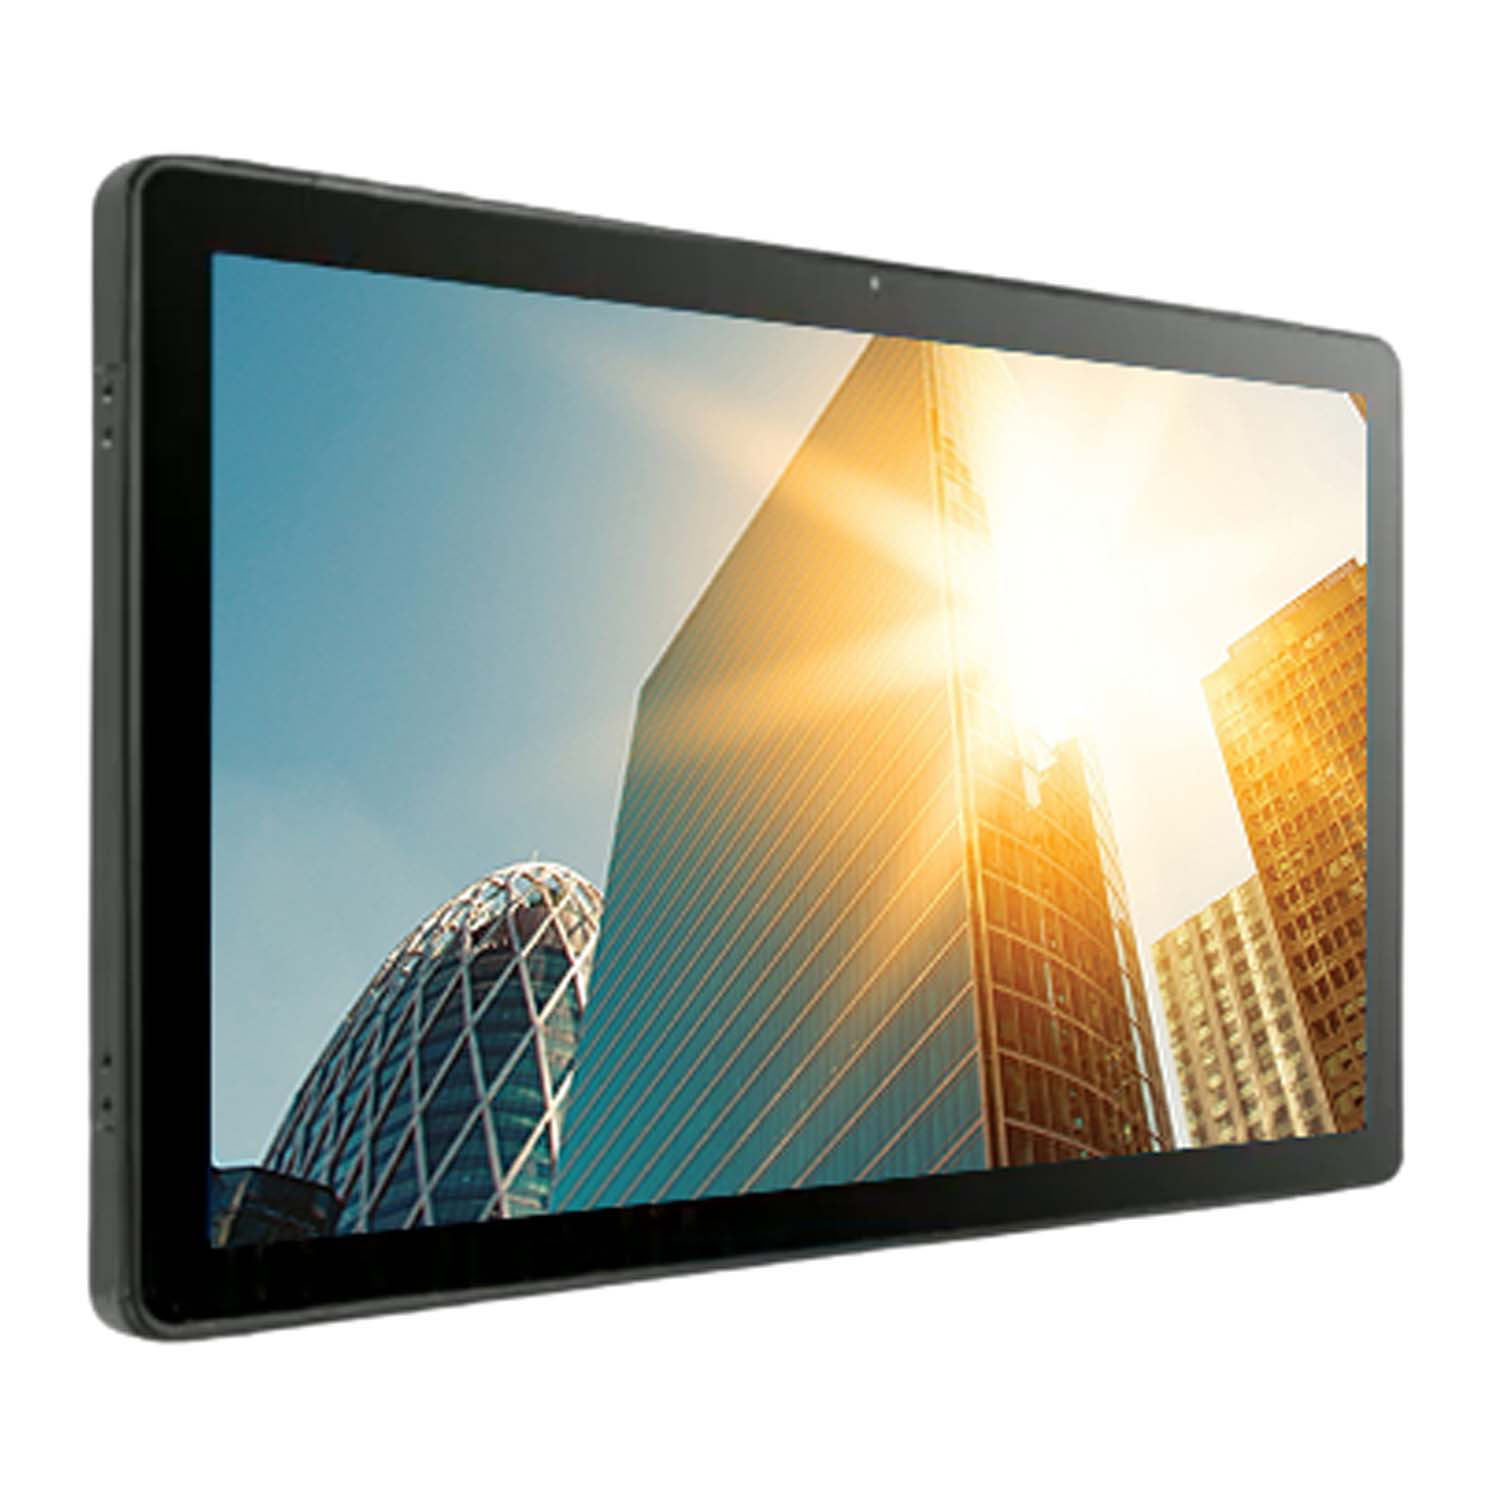 INDUSTRIAL OPEN FRAME HIGH BRIGHT TOUCH MONITOR KEETOUCH 21,5" KT-215-CHWSGF1